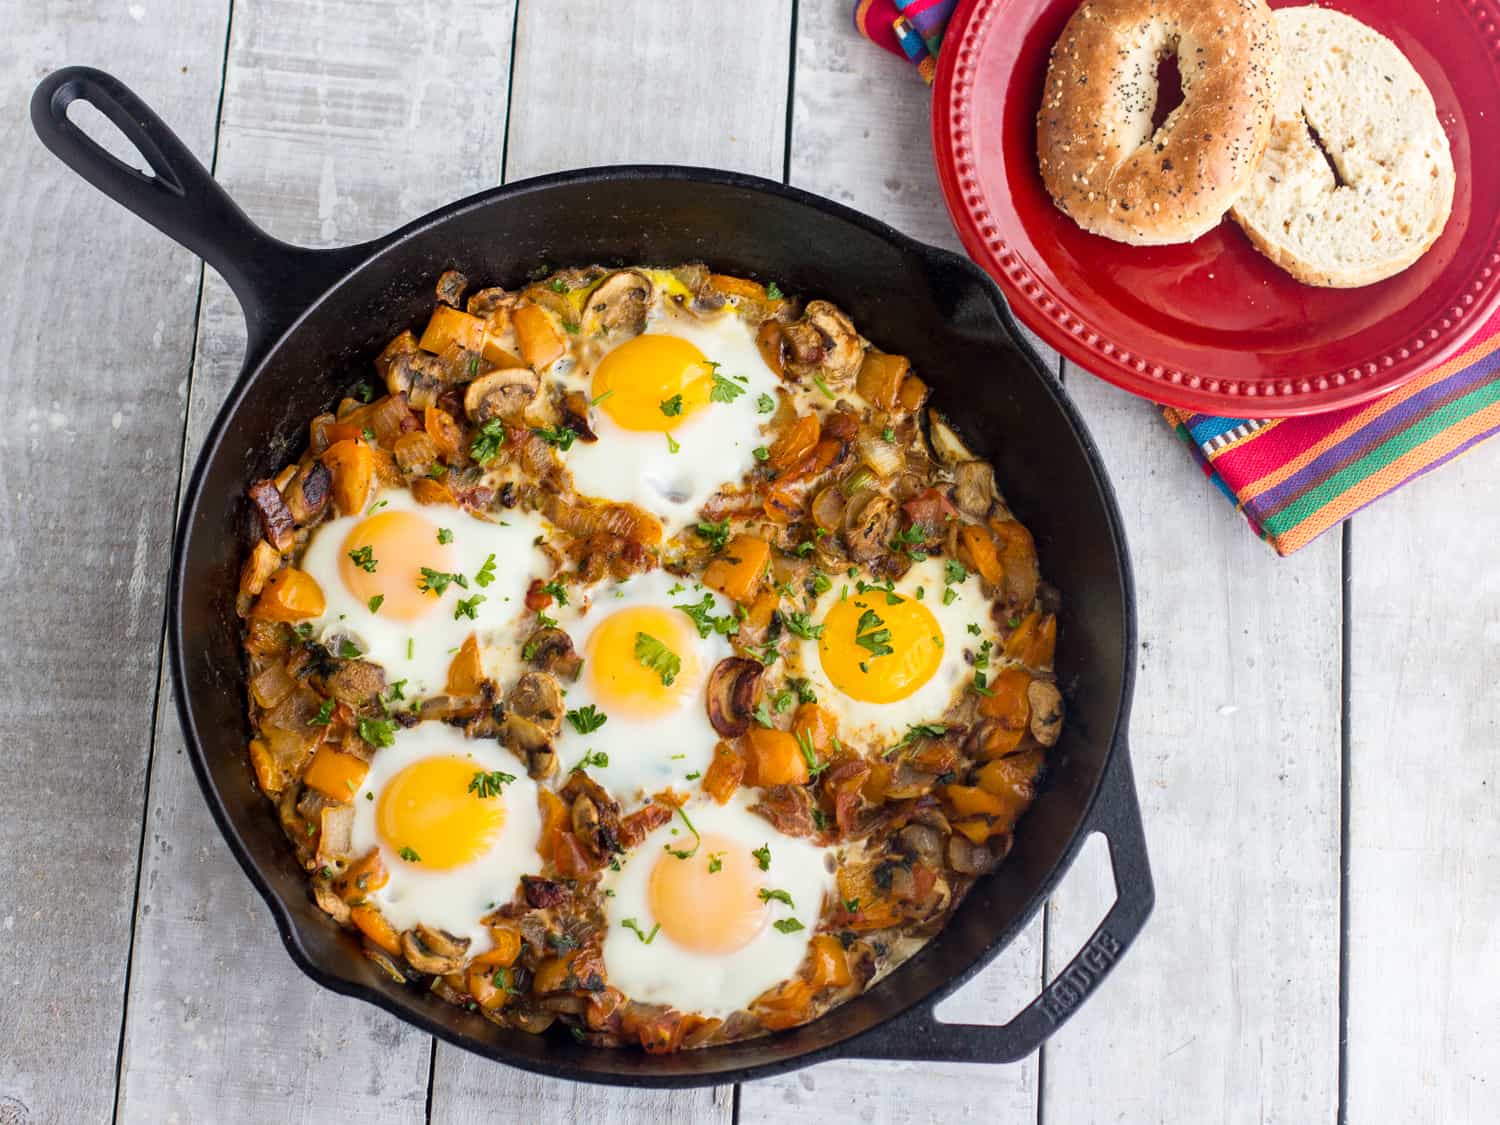 Baked Eggs Recipe in a Cast Iron Skillet